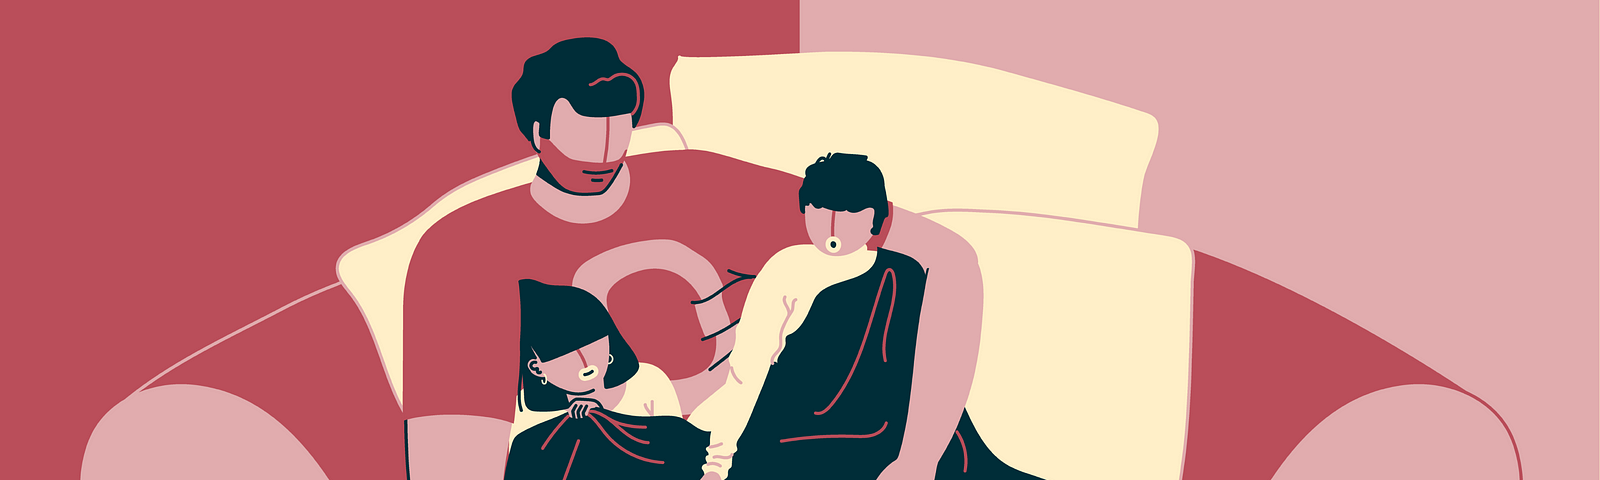 Digital art by Supriya Bhonsle of a dad reading to two young kids, snuggled on a couch with a blanket